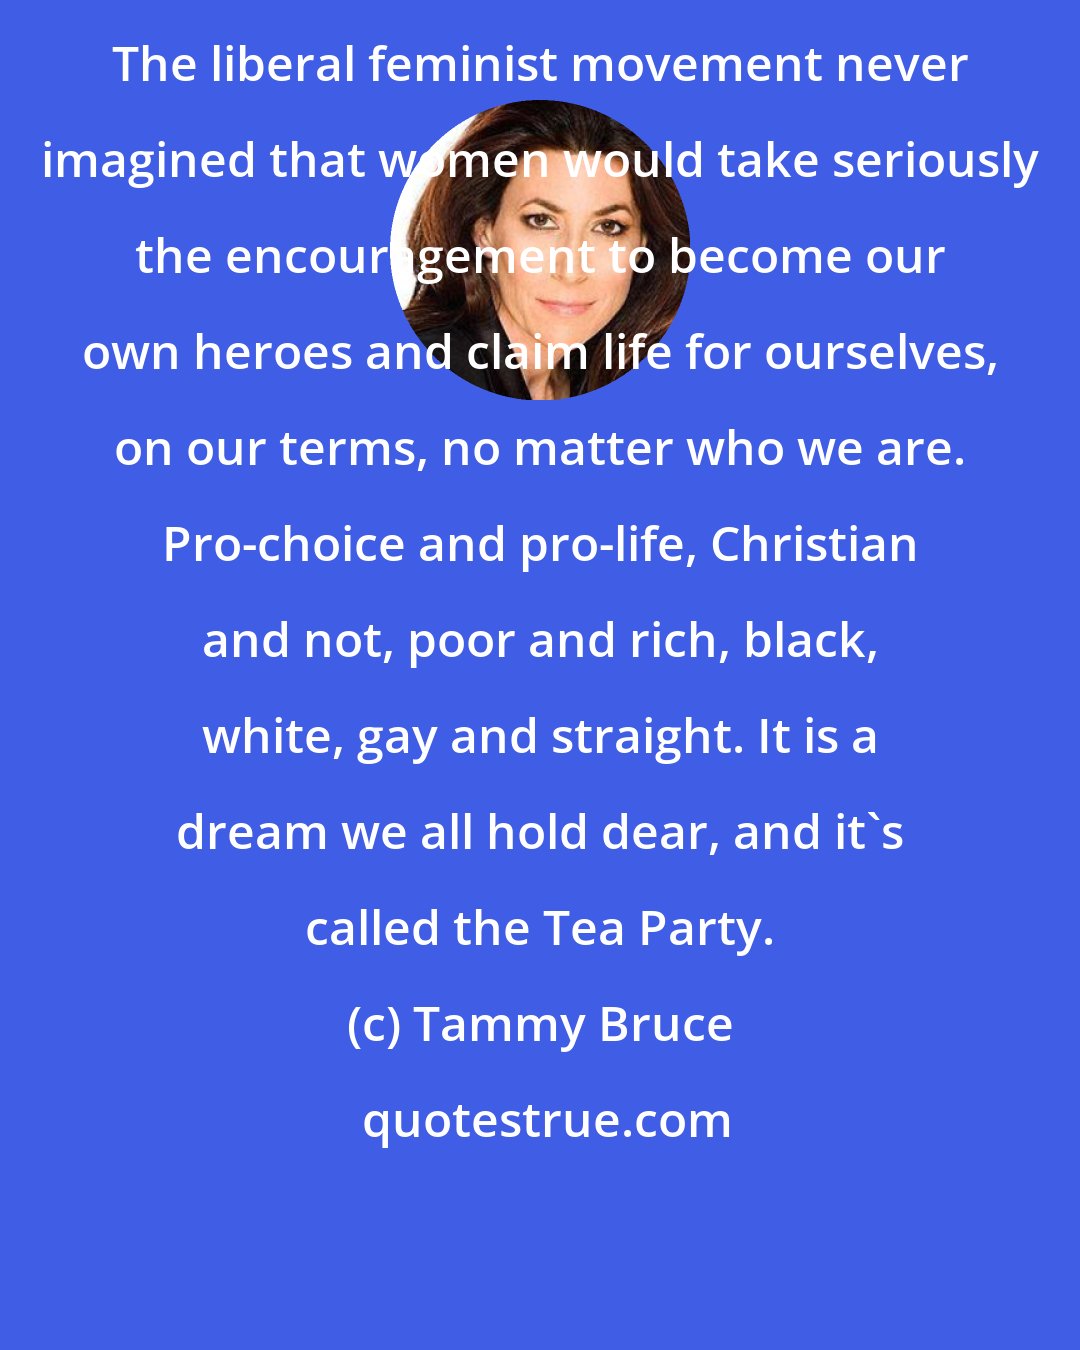 Tammy Bruce: The liberal feminist movement never imagined that women would take seriously the encouragement to become our own heroes and claim life for ourselves, on our terms, no matter who we are. Pro-choice and pro-life, Christian and not, poor and rich, black, white, gay and straight. It is a dream we all hold dear, and it's called the Tea Party.